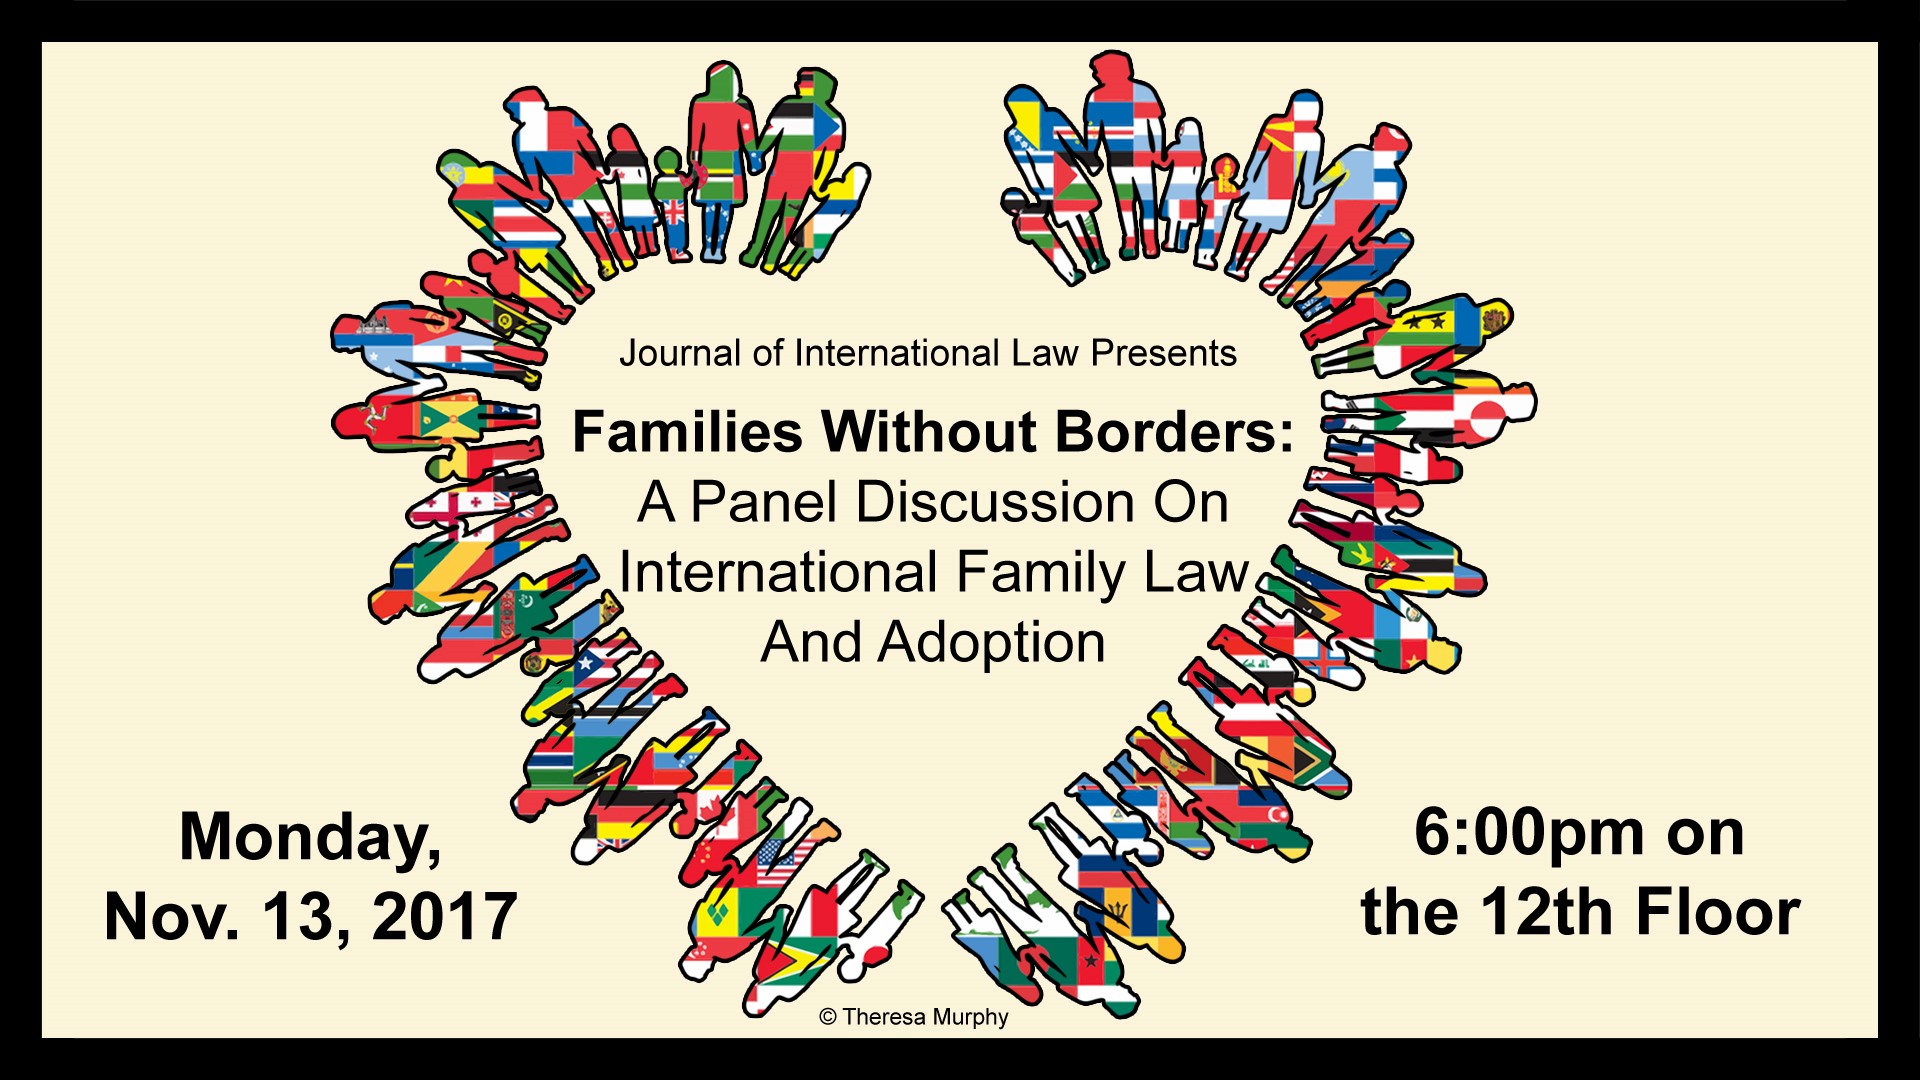 Families Without Borders: A panel discussion on international family law and adoption